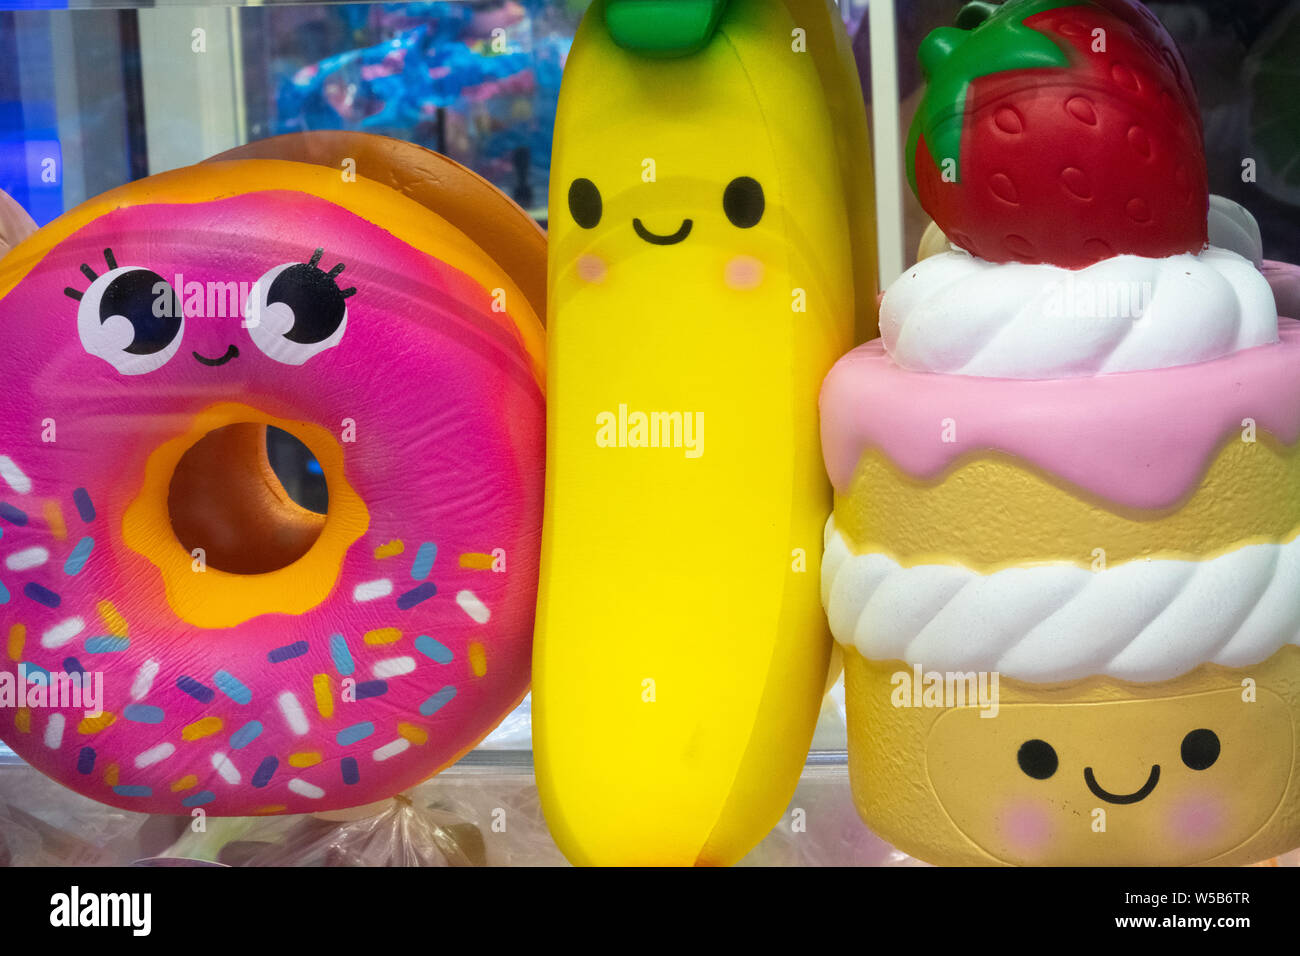 Colorful plastic toy fruits and sweets that are prizes at a carnival Stock Photo